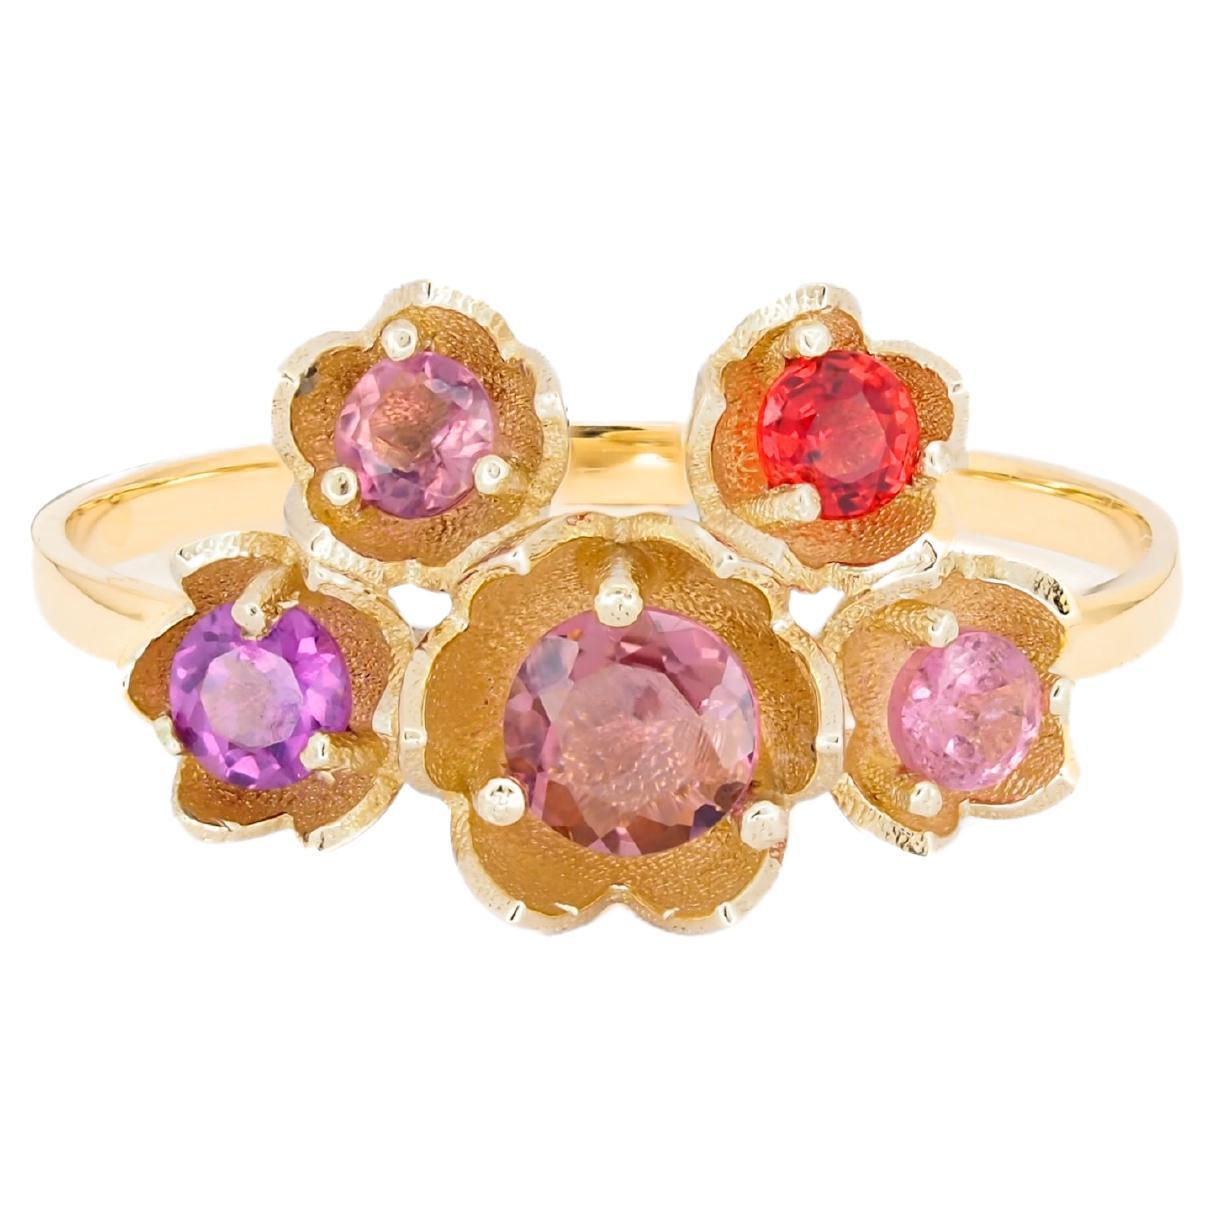 14 karat gold Blossom ring with multicolored gemstones. Pink Tourmaline ring